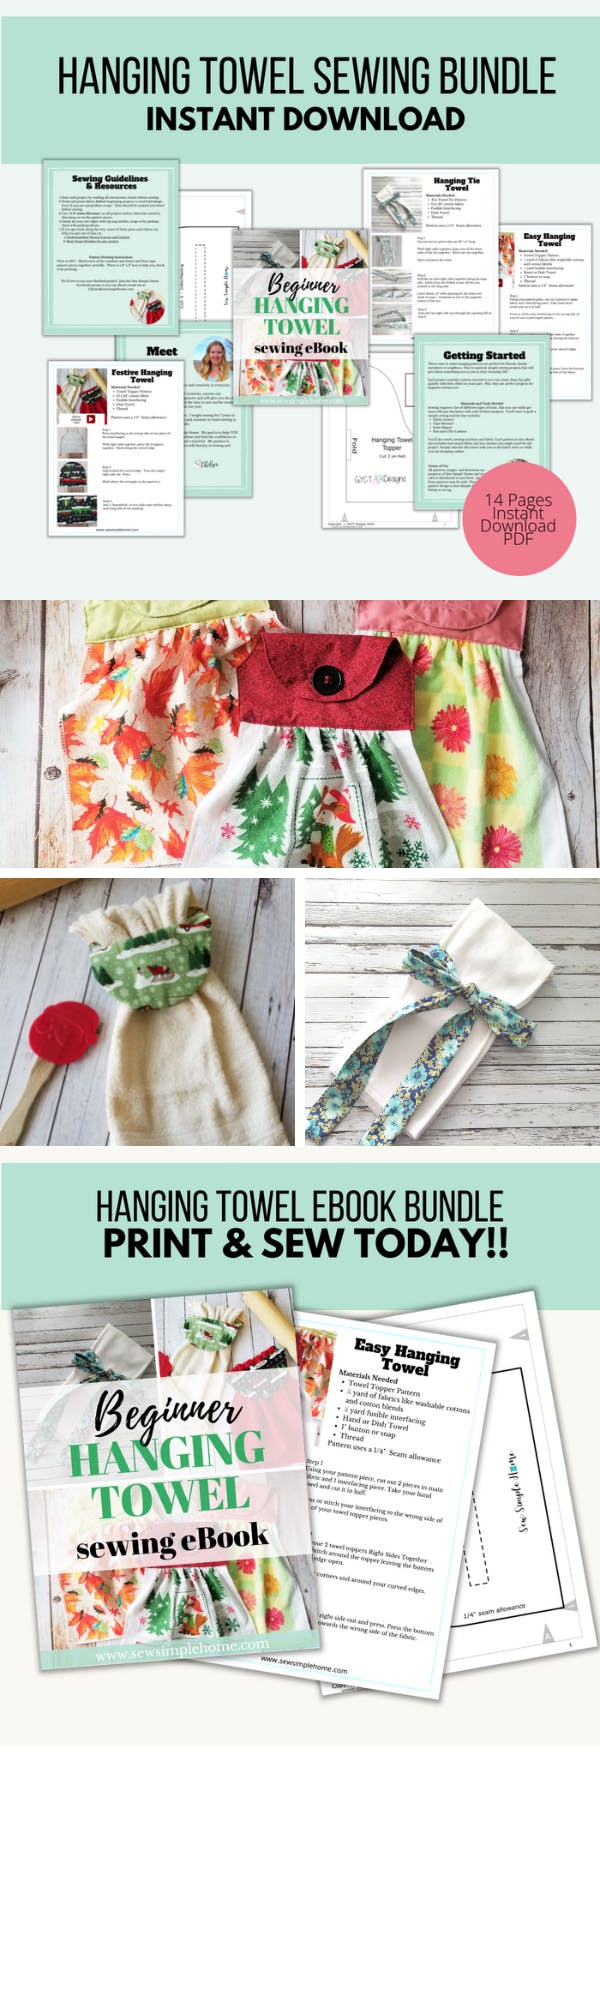 Hanging Kitchen Towel Pattern and Tutorial PDF (Instant Download) 